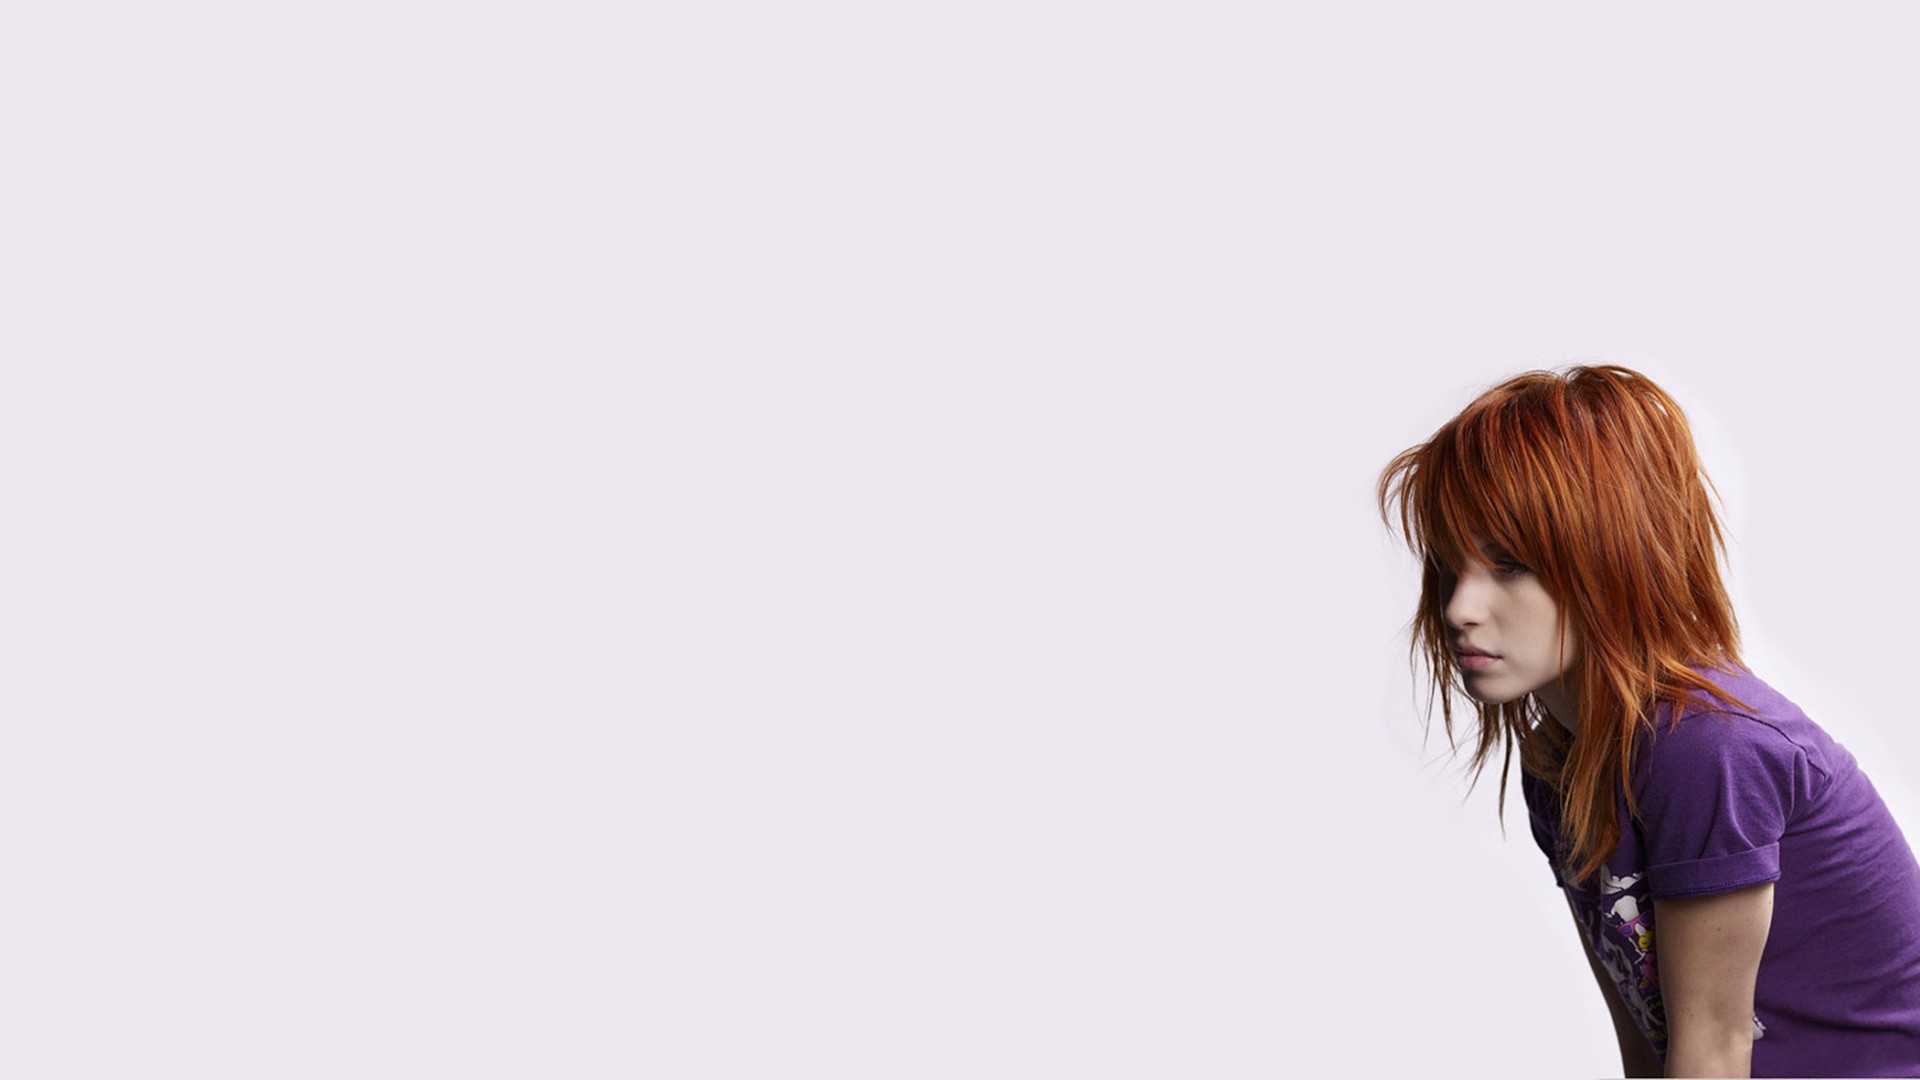 People 1920x1080 simple background Paramore Hayley Williams redhead women singer music women indoors white background indoors studio purple top hair in face